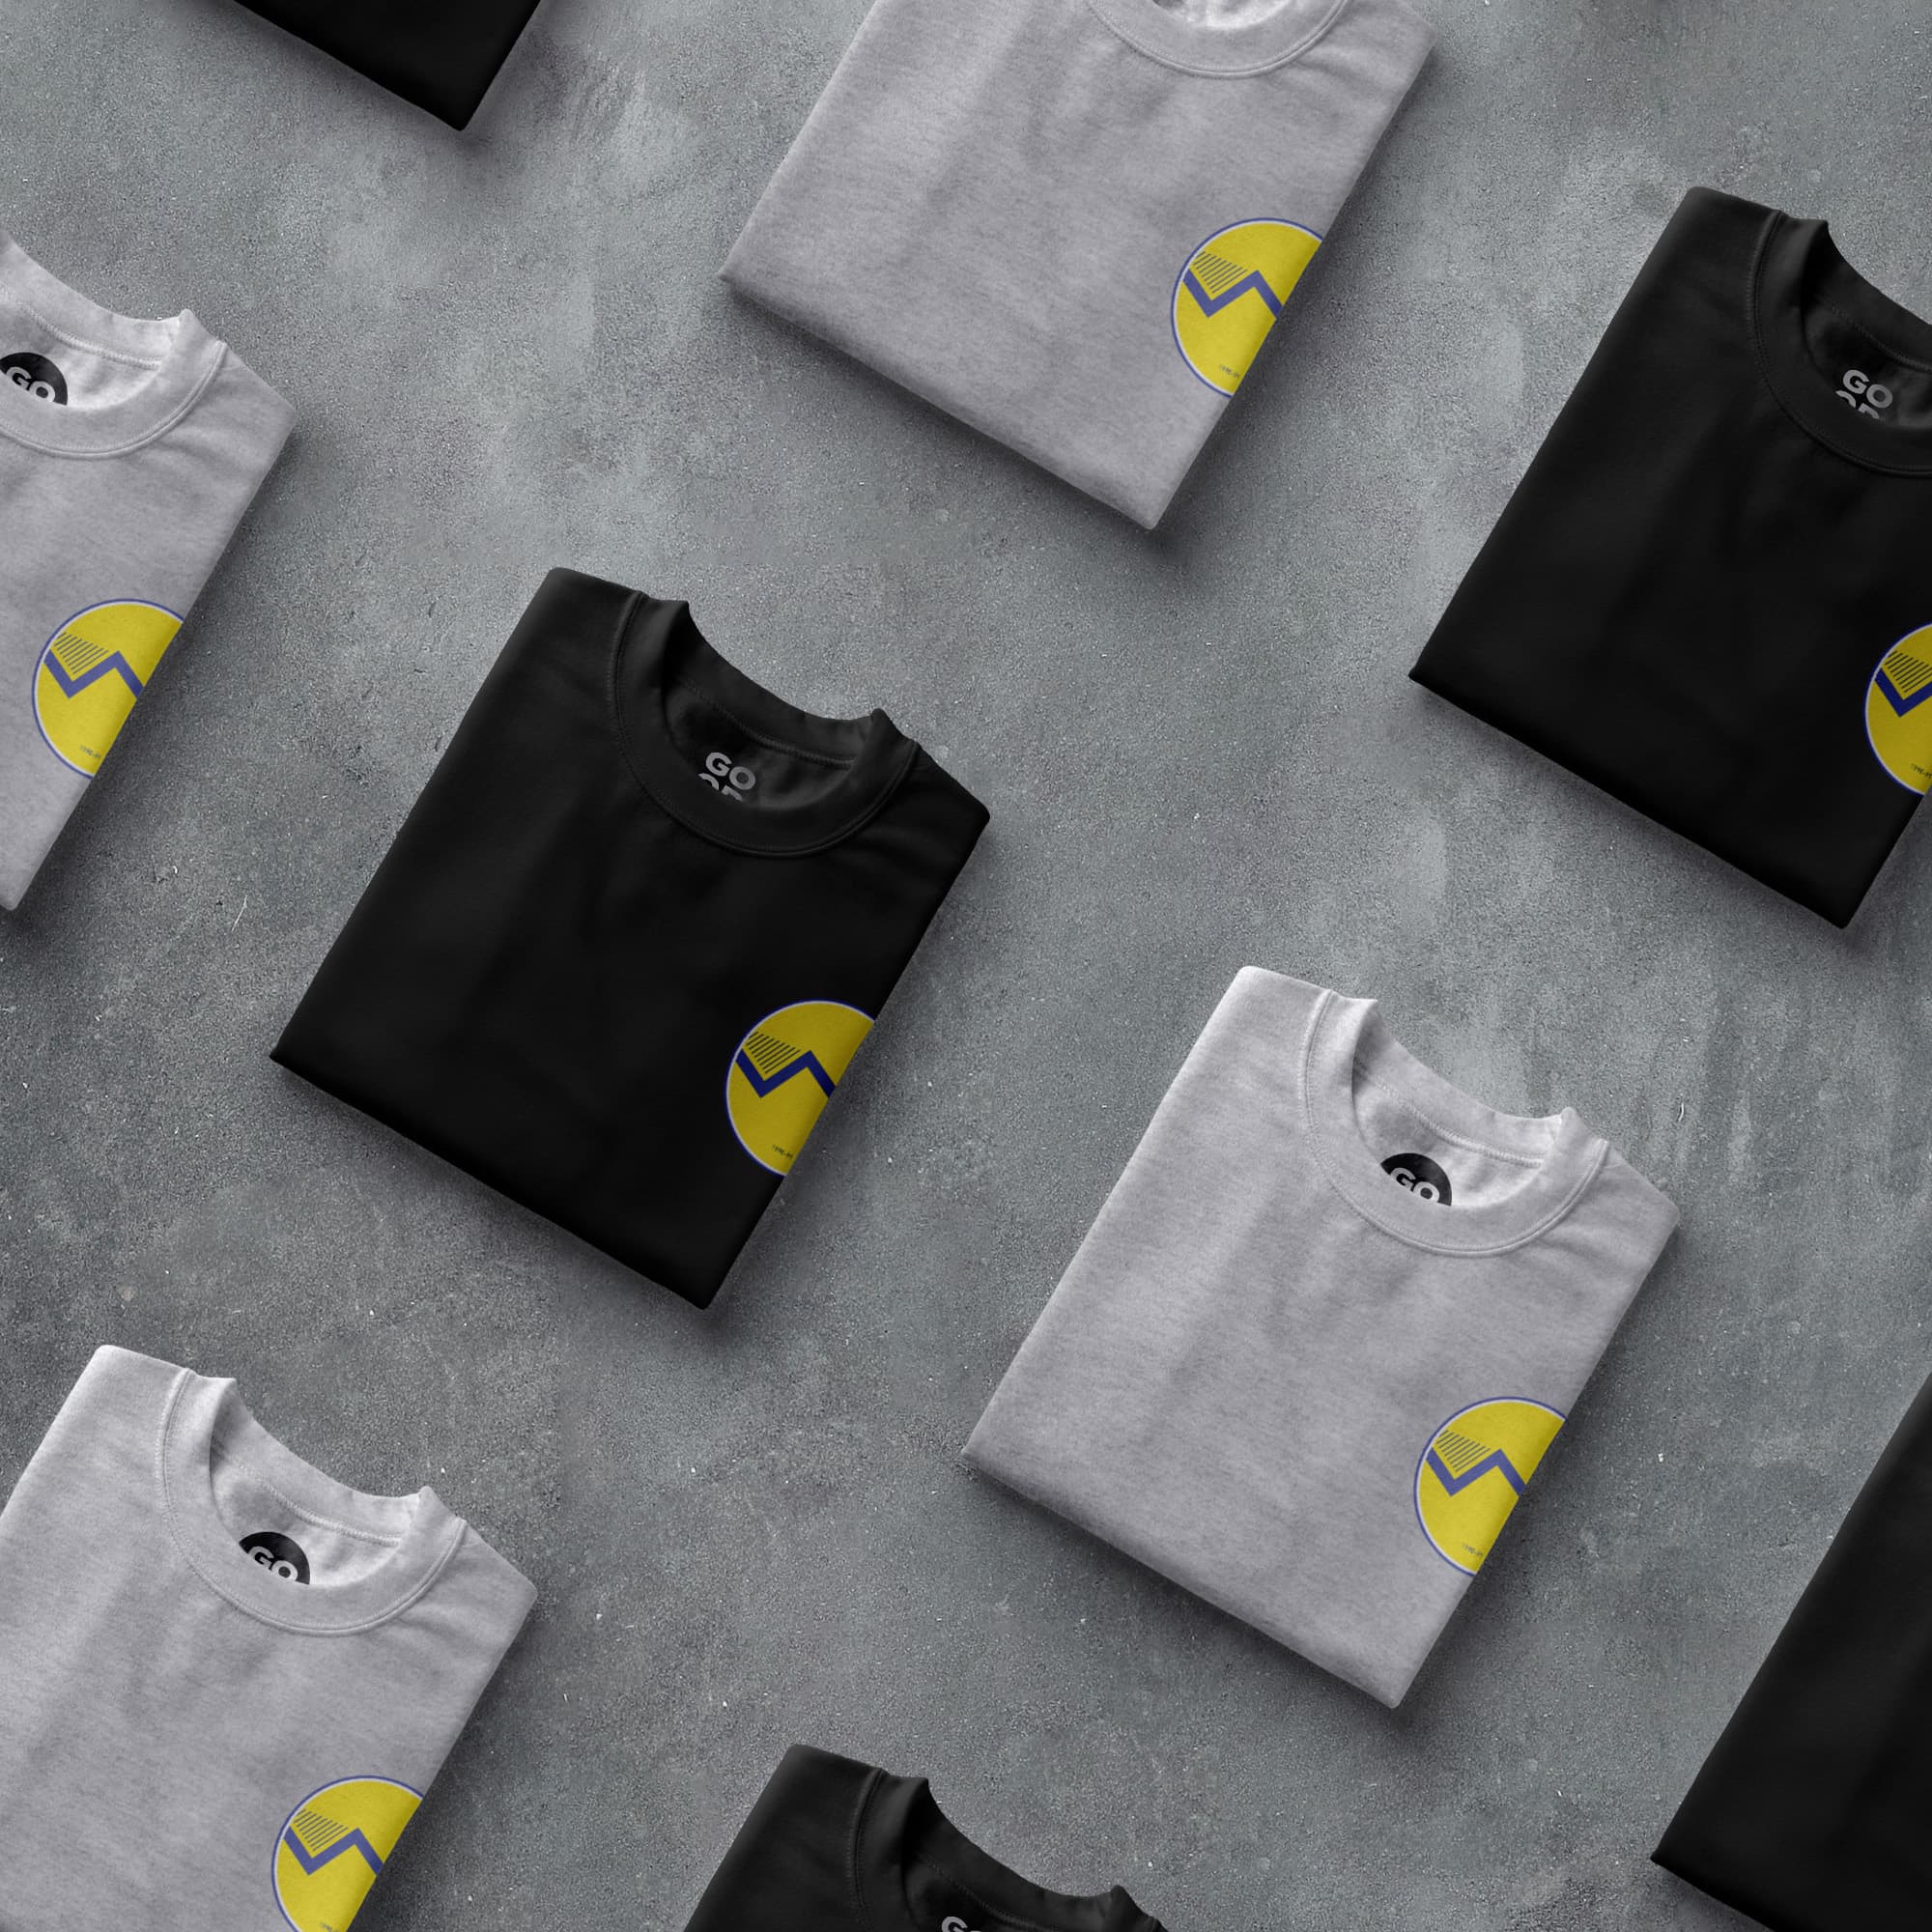 a group of black and white shirts with yellow logos